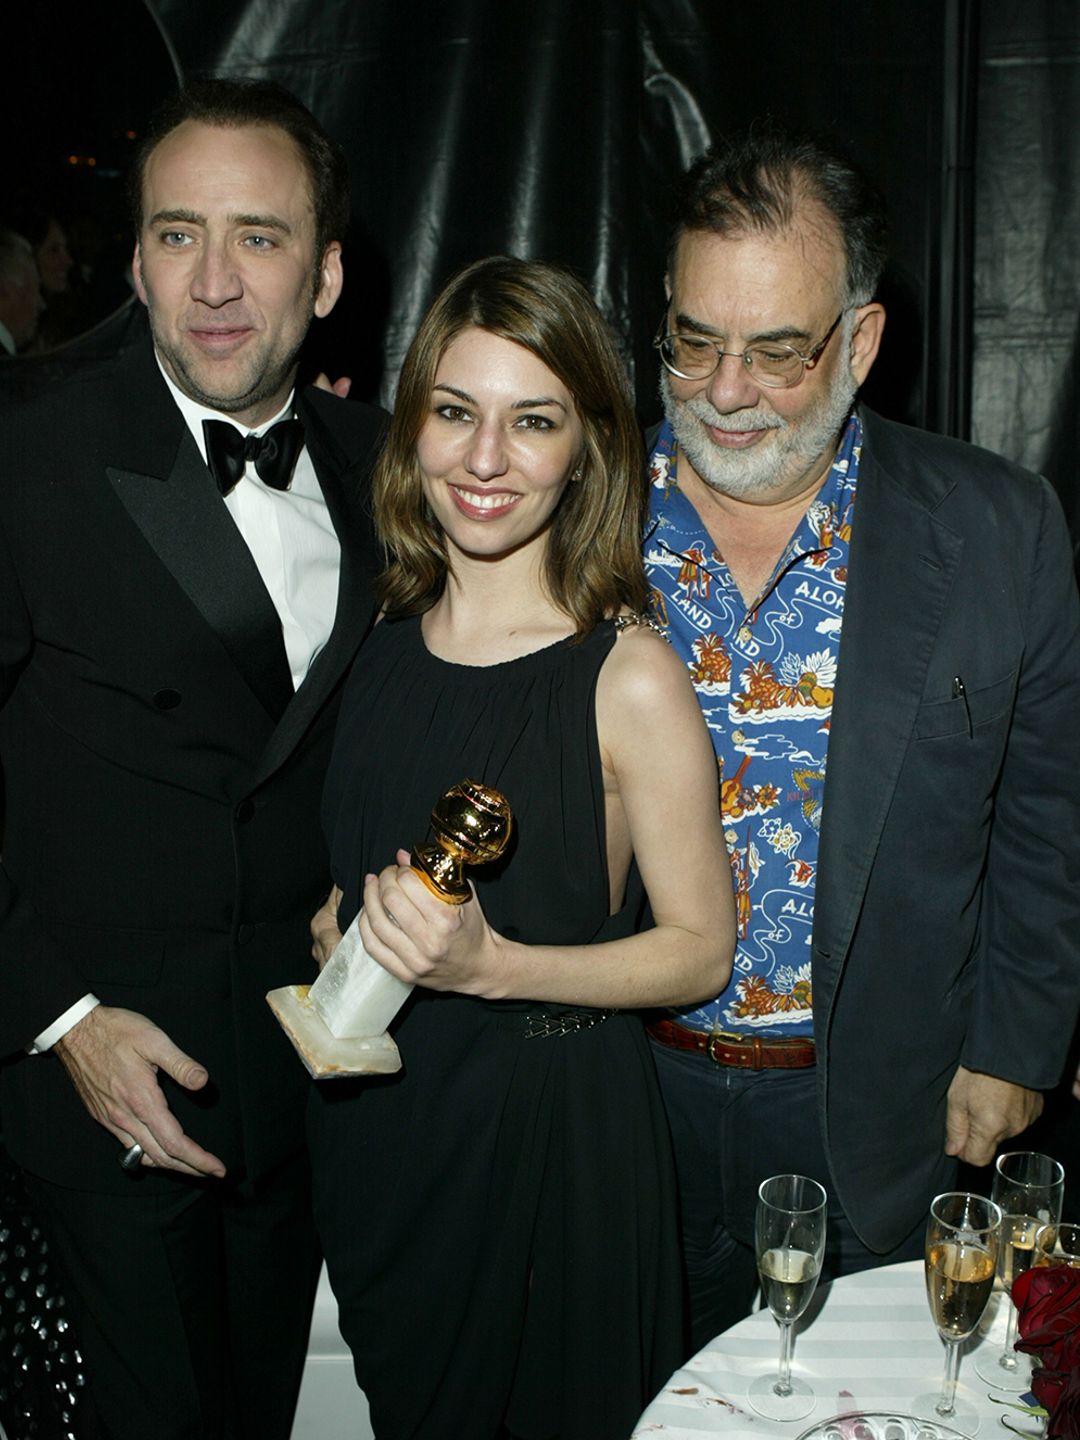 Nicolas with his uncle Francis Ford Coppola and cousin Sofia Coppola